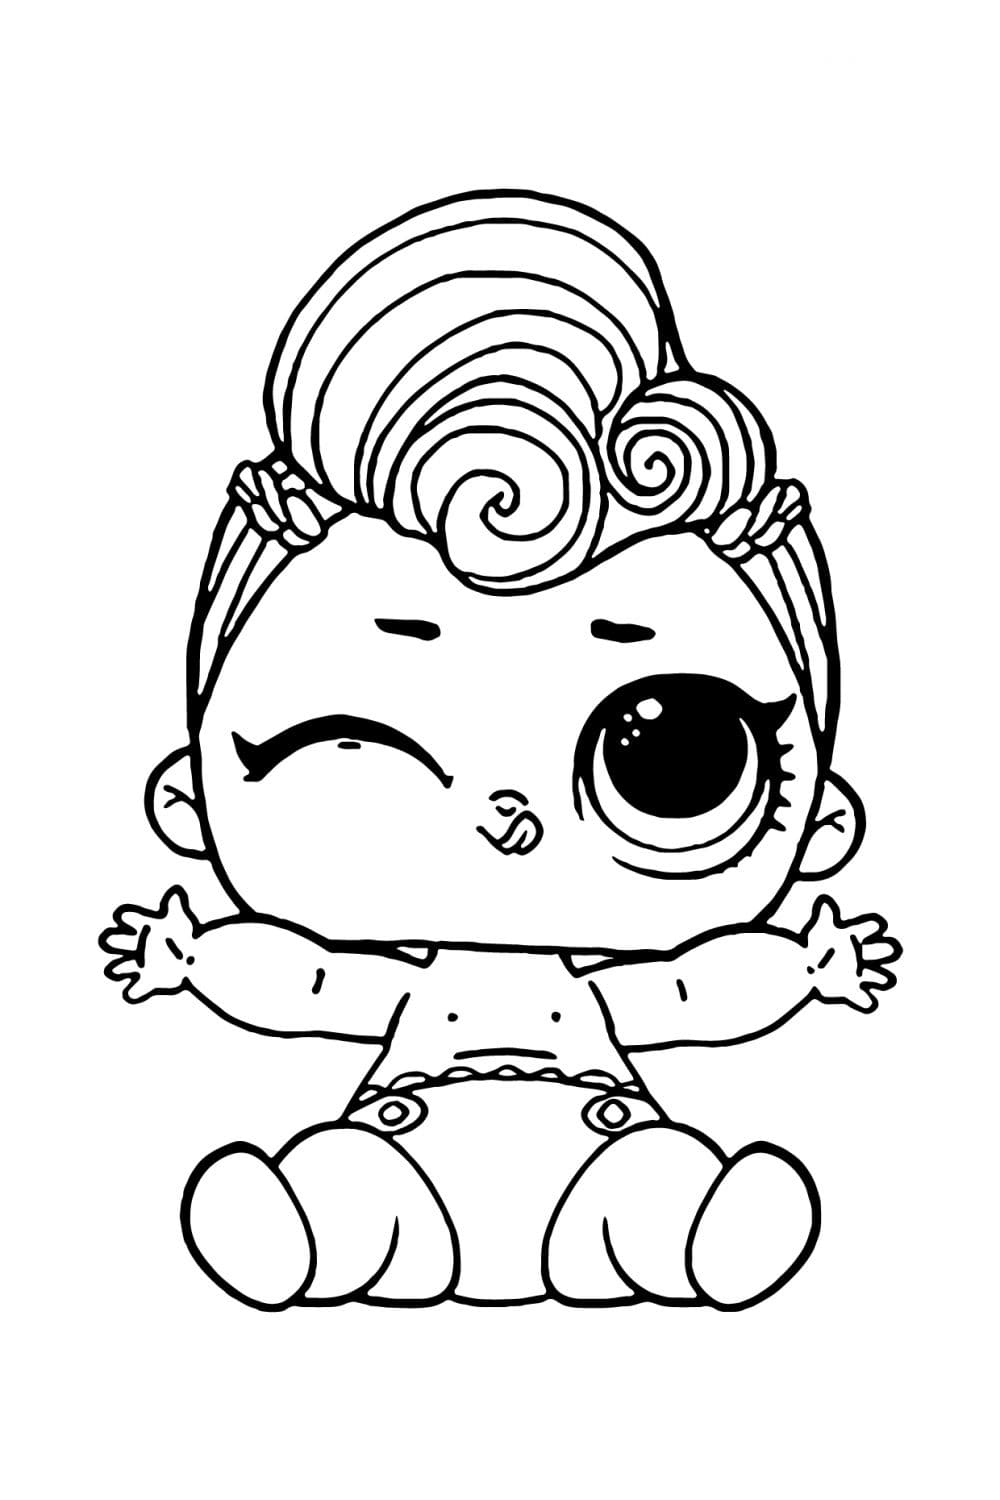 LOL Baby Grunge Coloring Page - Free Printable Coloring Pages for Kids